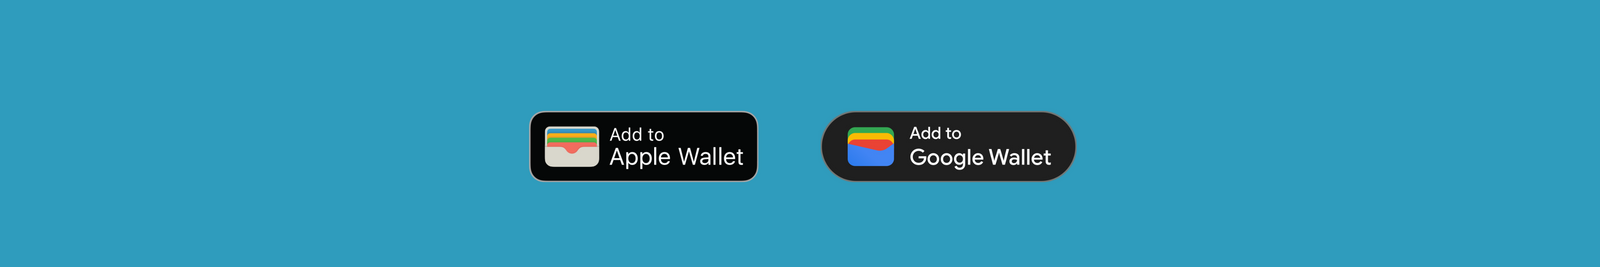 Two buttons for adding payment options to apple wallet and google wallet against a blue background.